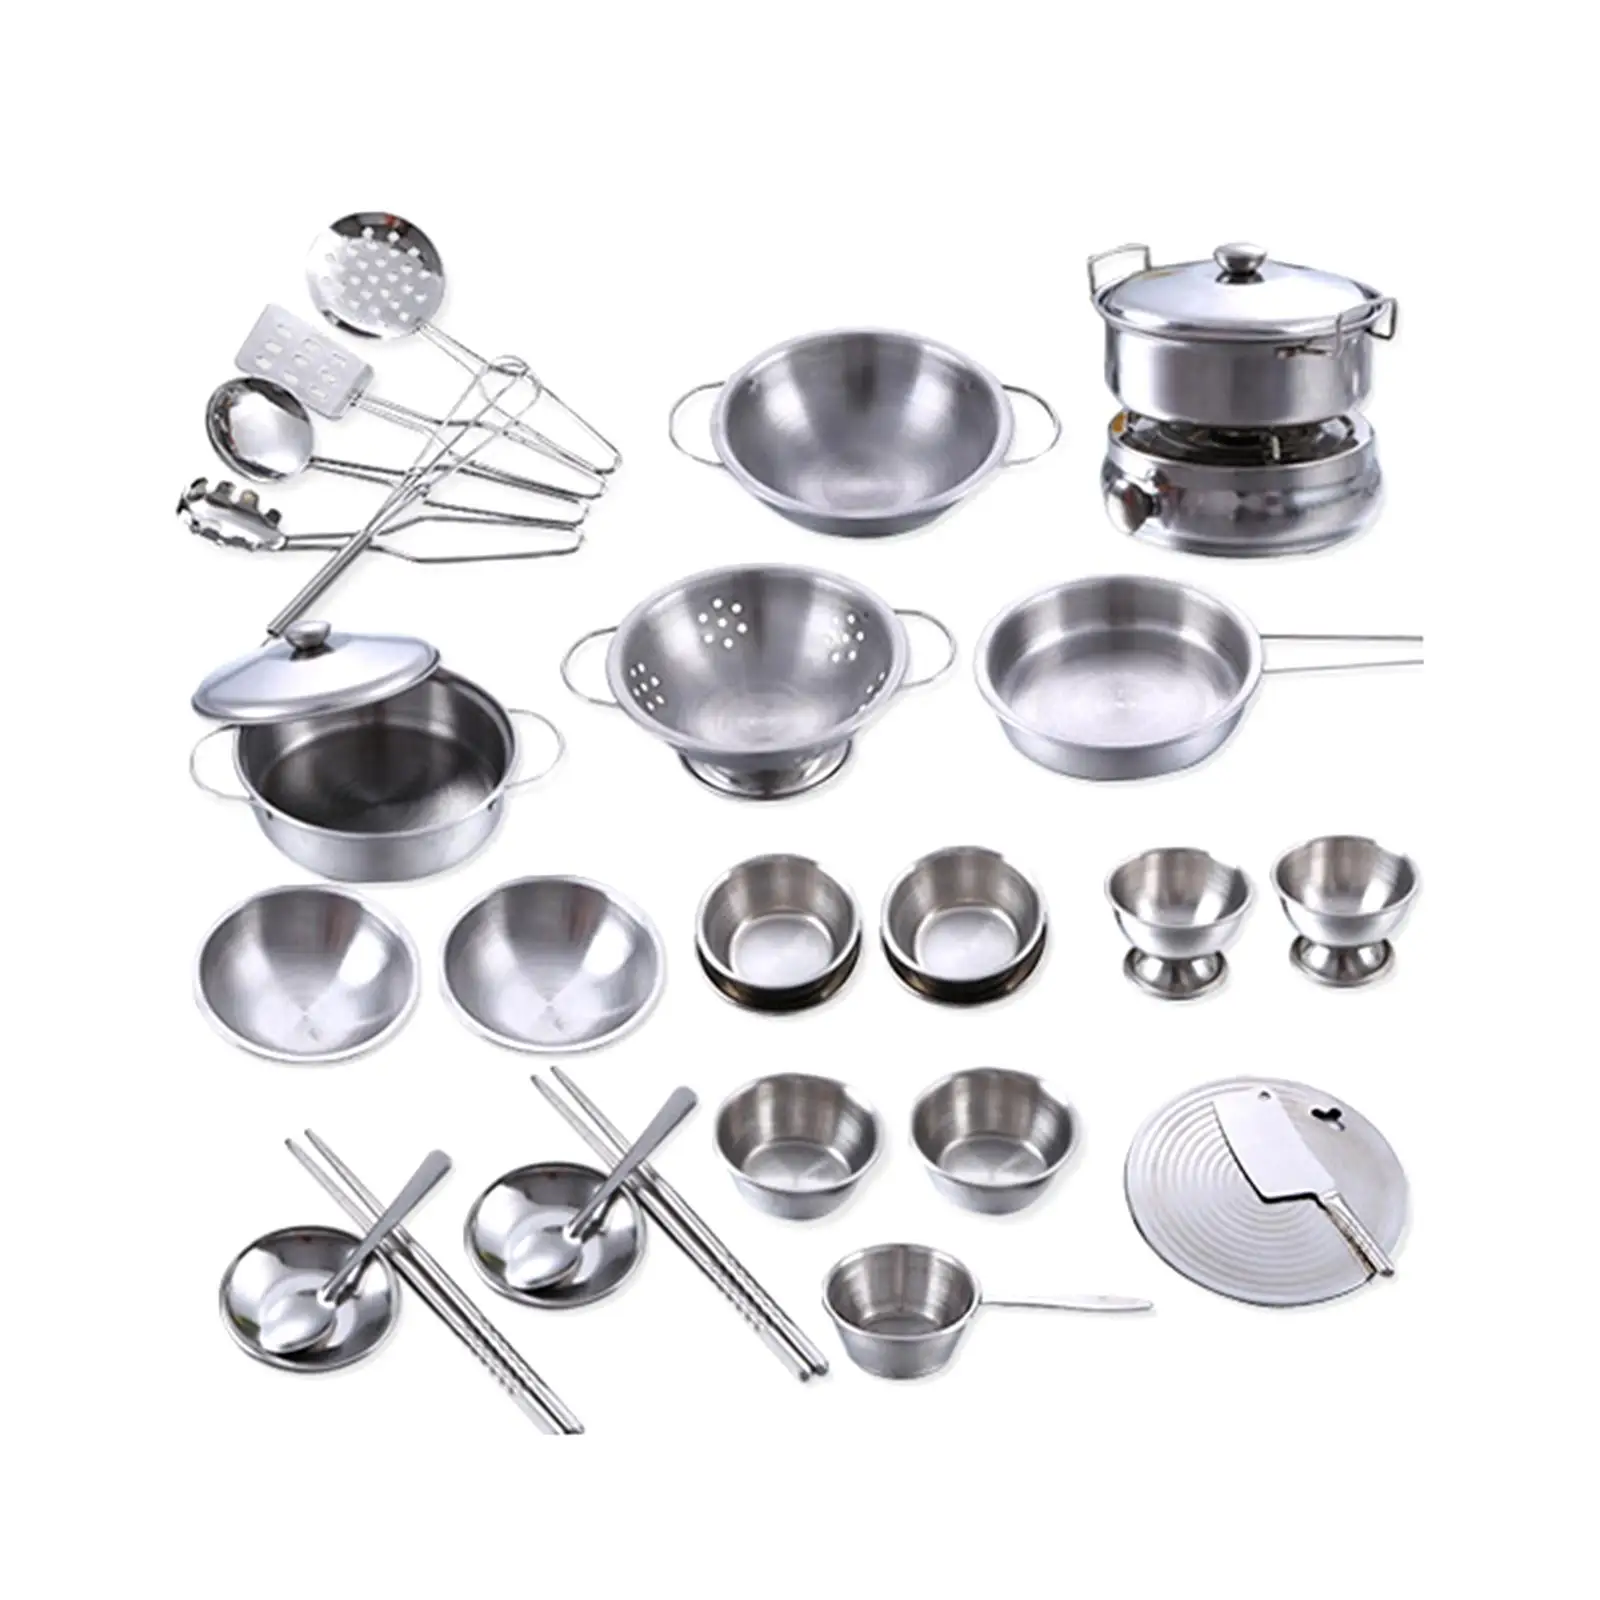 25 Pieces Kids Pretend Play Cookware Set Kitchen Toys Polished Stainless Steel